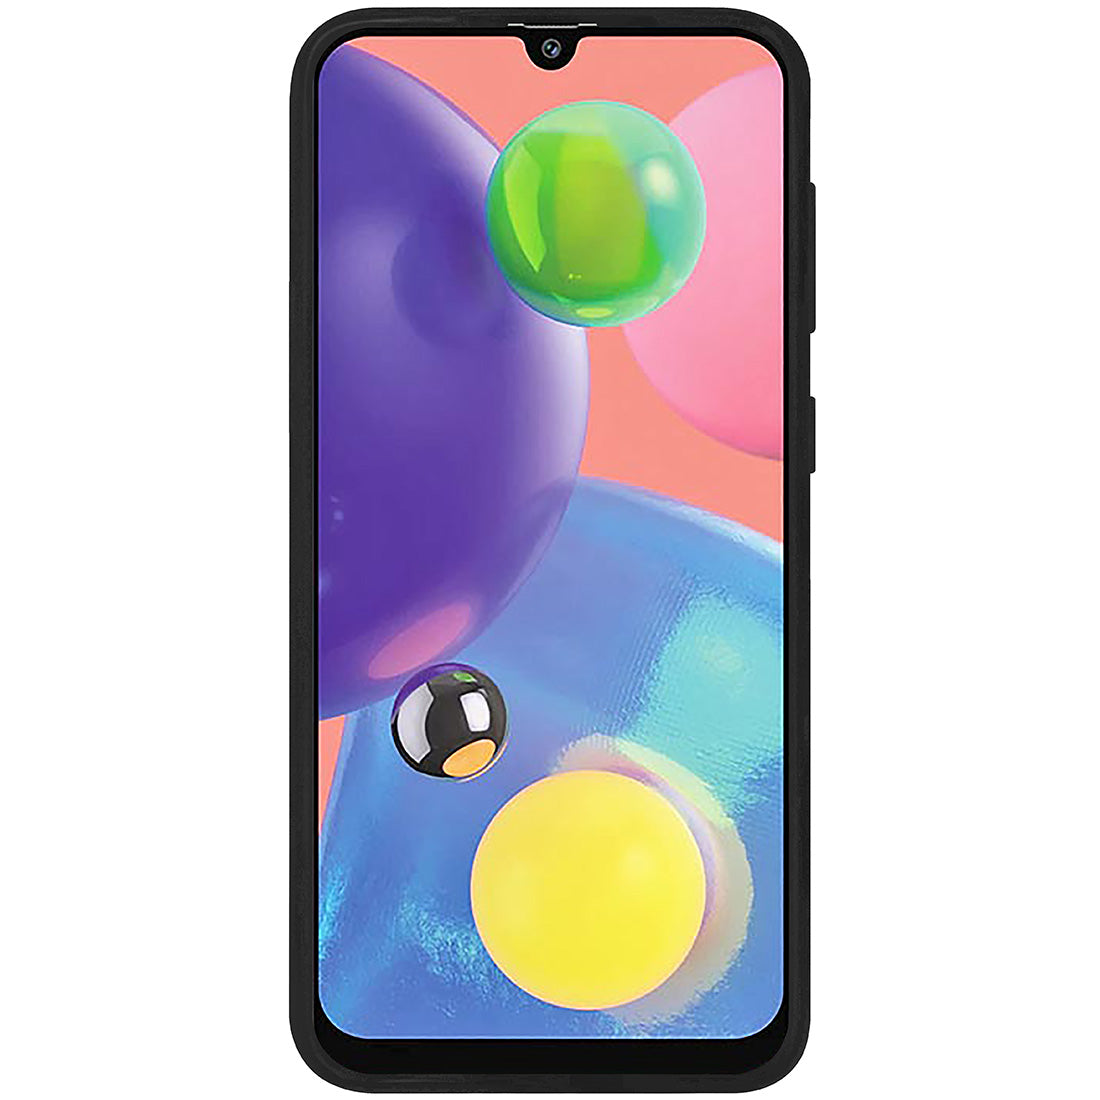 Comfort Grip Back Case Cover for Samsung Galaxy A70s